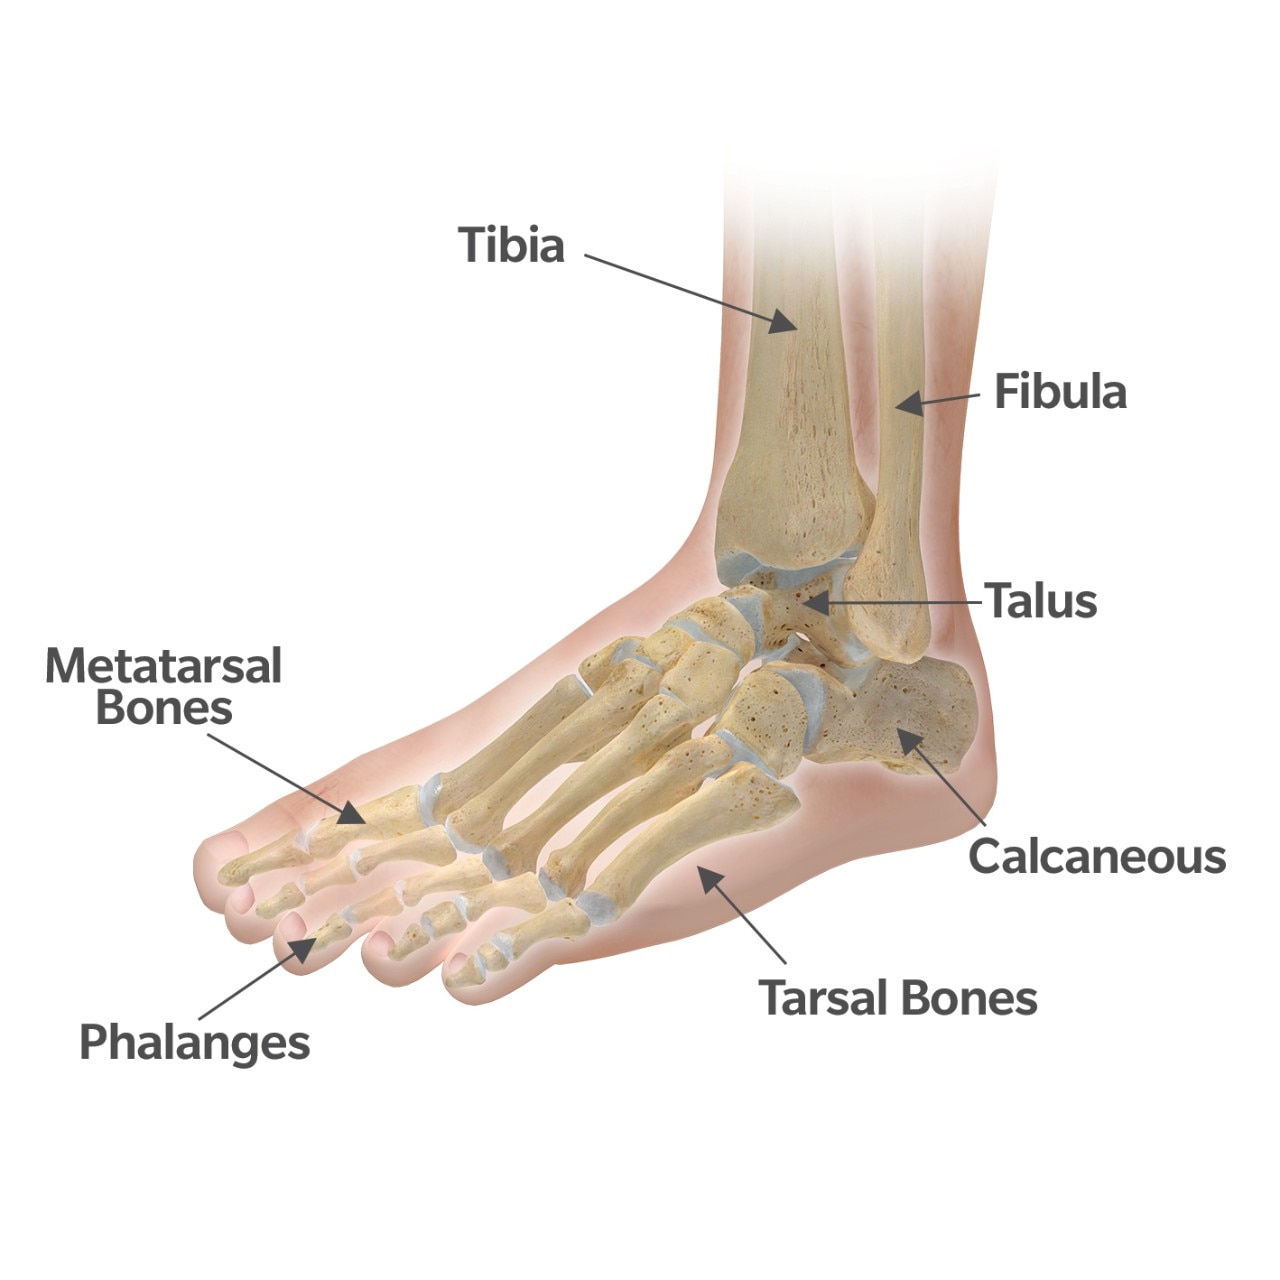 What's Causing My Foot and Ankle Pain?